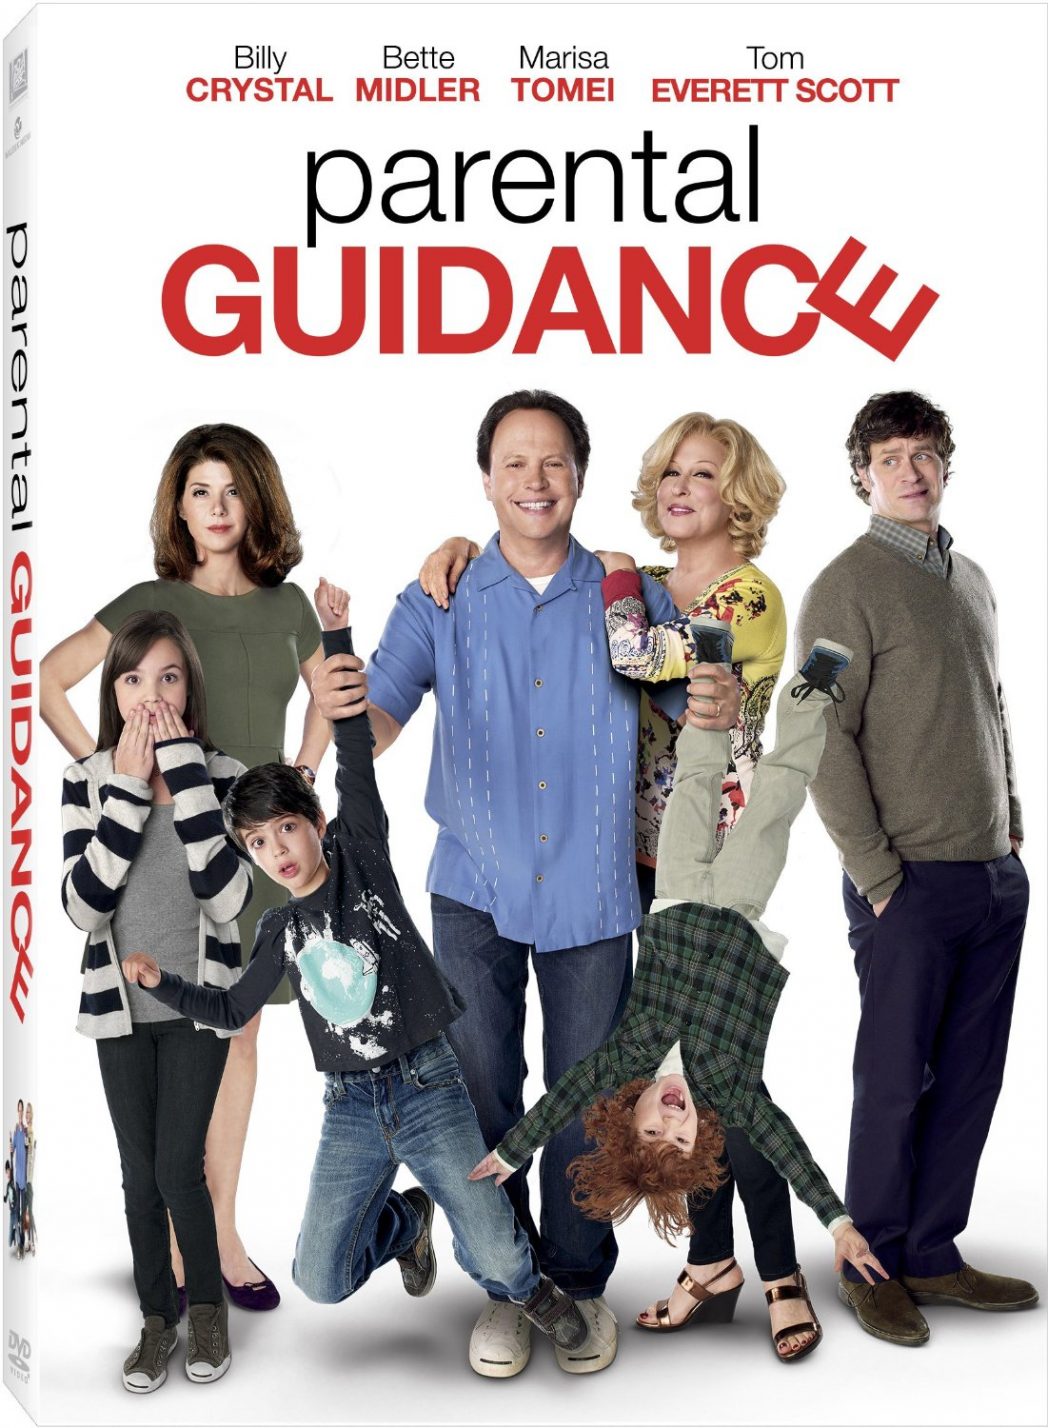 Want a really funny movie to watch? Parental Guidance is for you!! - The  Mommyhood Chronicles